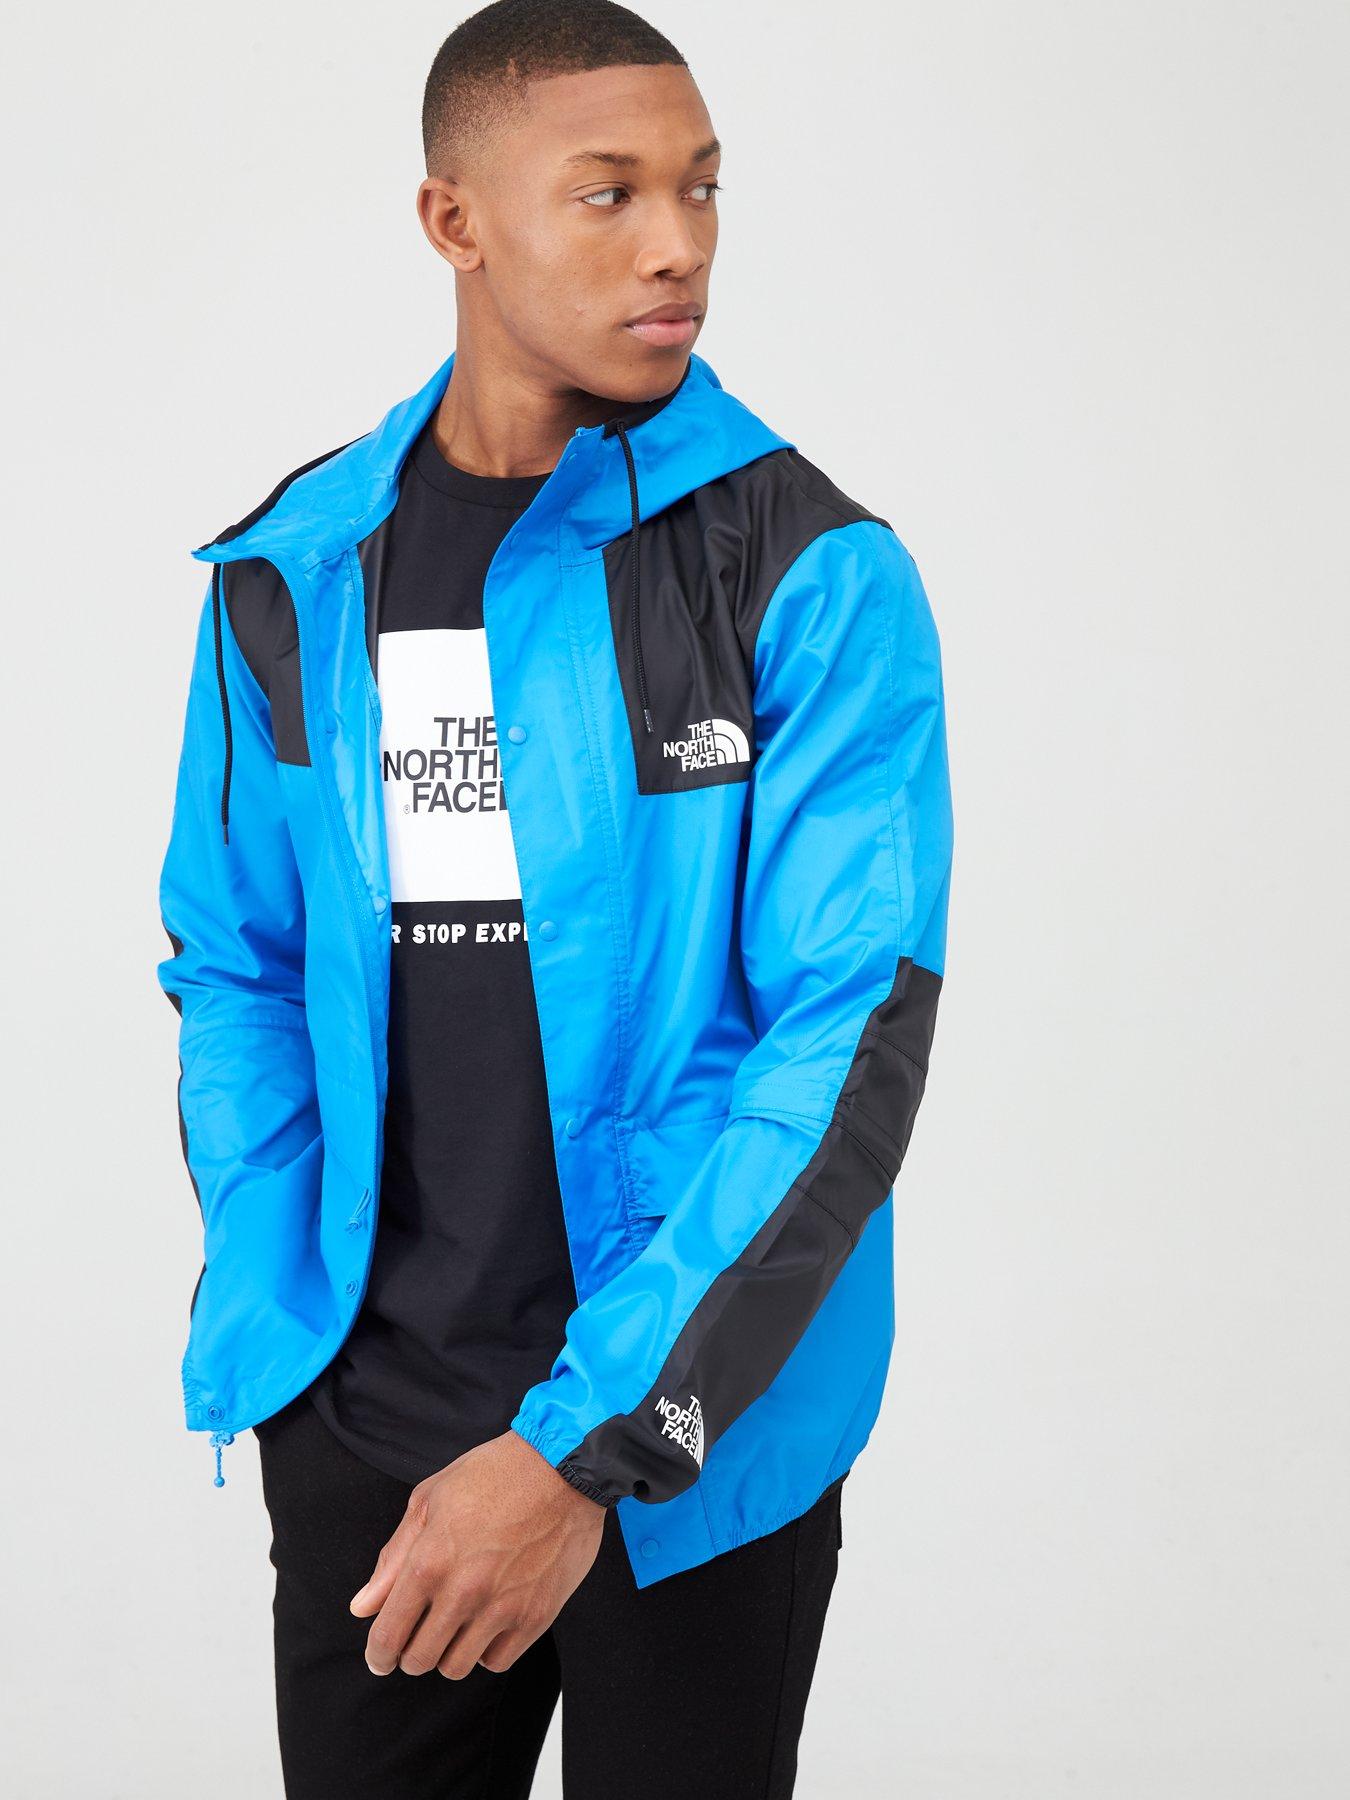 the north face jacket blue